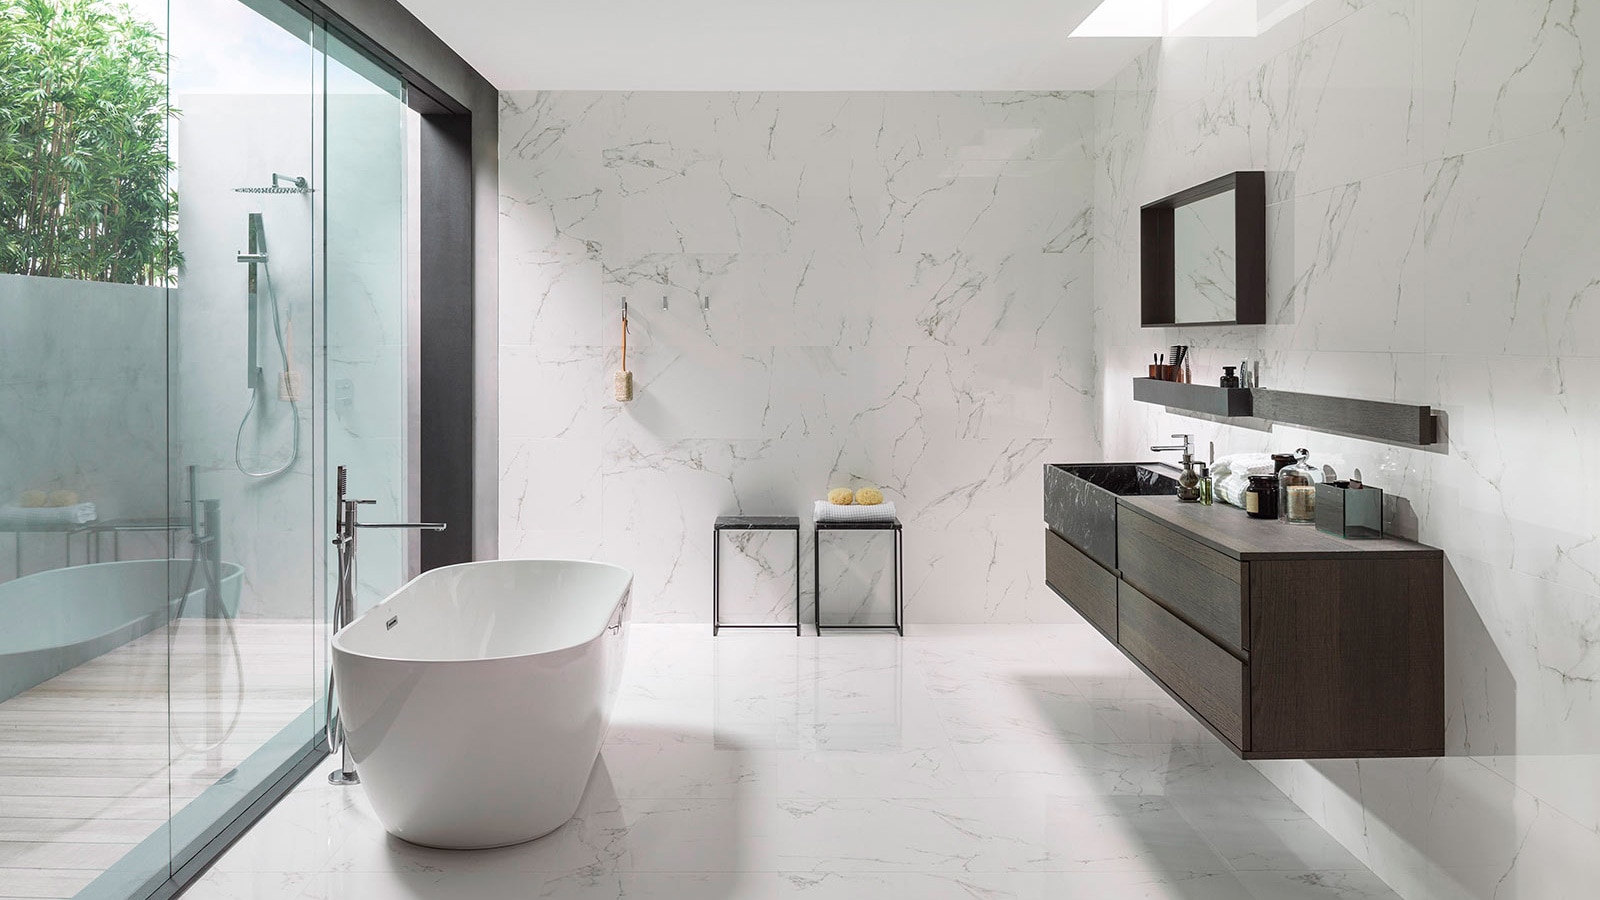 The marble bathroom, never out of style